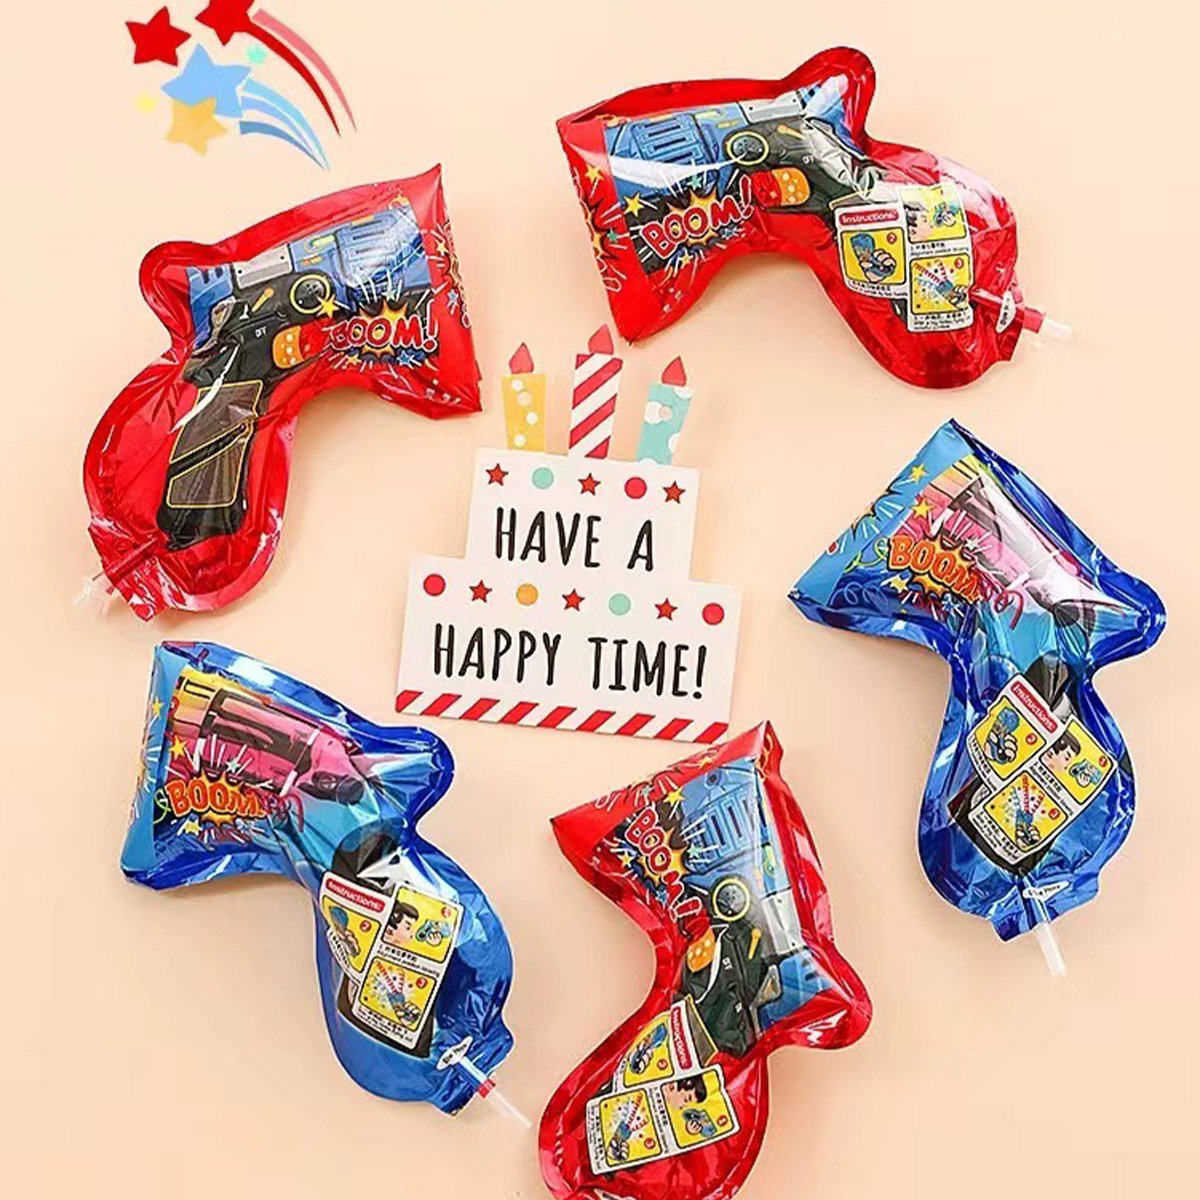 Fireworks Goodie Bags for Kids - The Happy Scraps